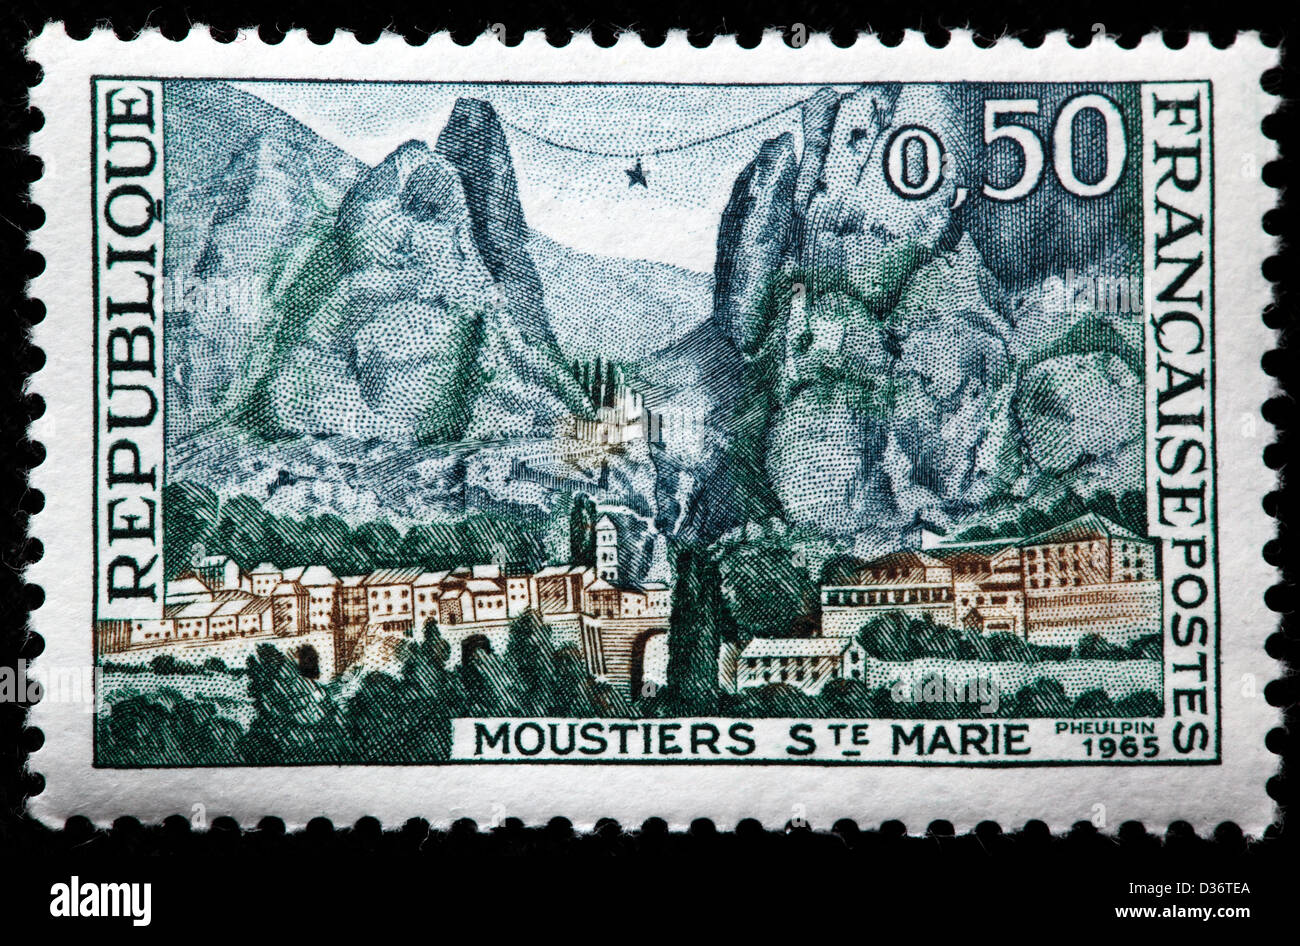 Moustiers-Sainte-Marie, postage stamp, France, 1965 Stock Photo